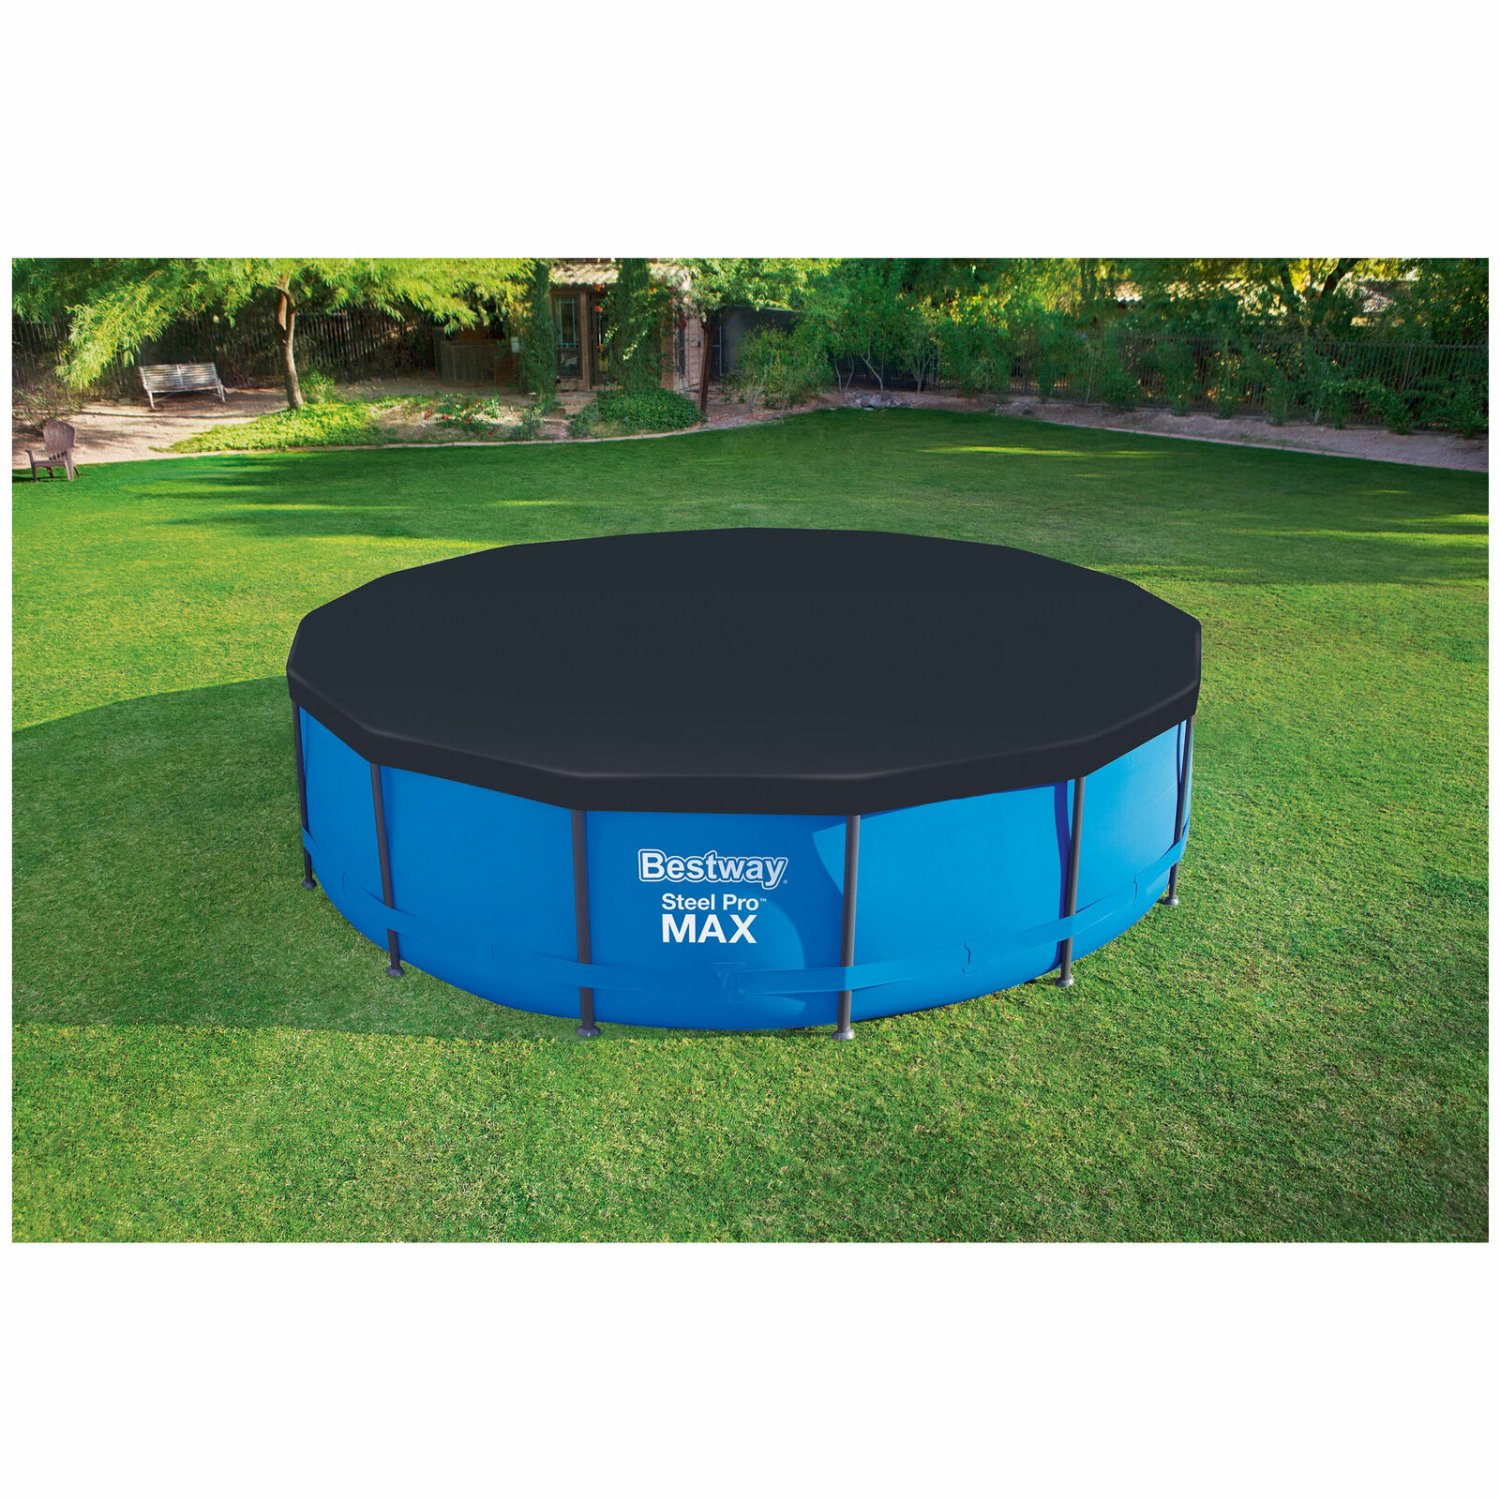 Flowclear 15 Foot Round Steel Pro MAXTM Above Ground Swimming Pool Cover, Black/233594228998